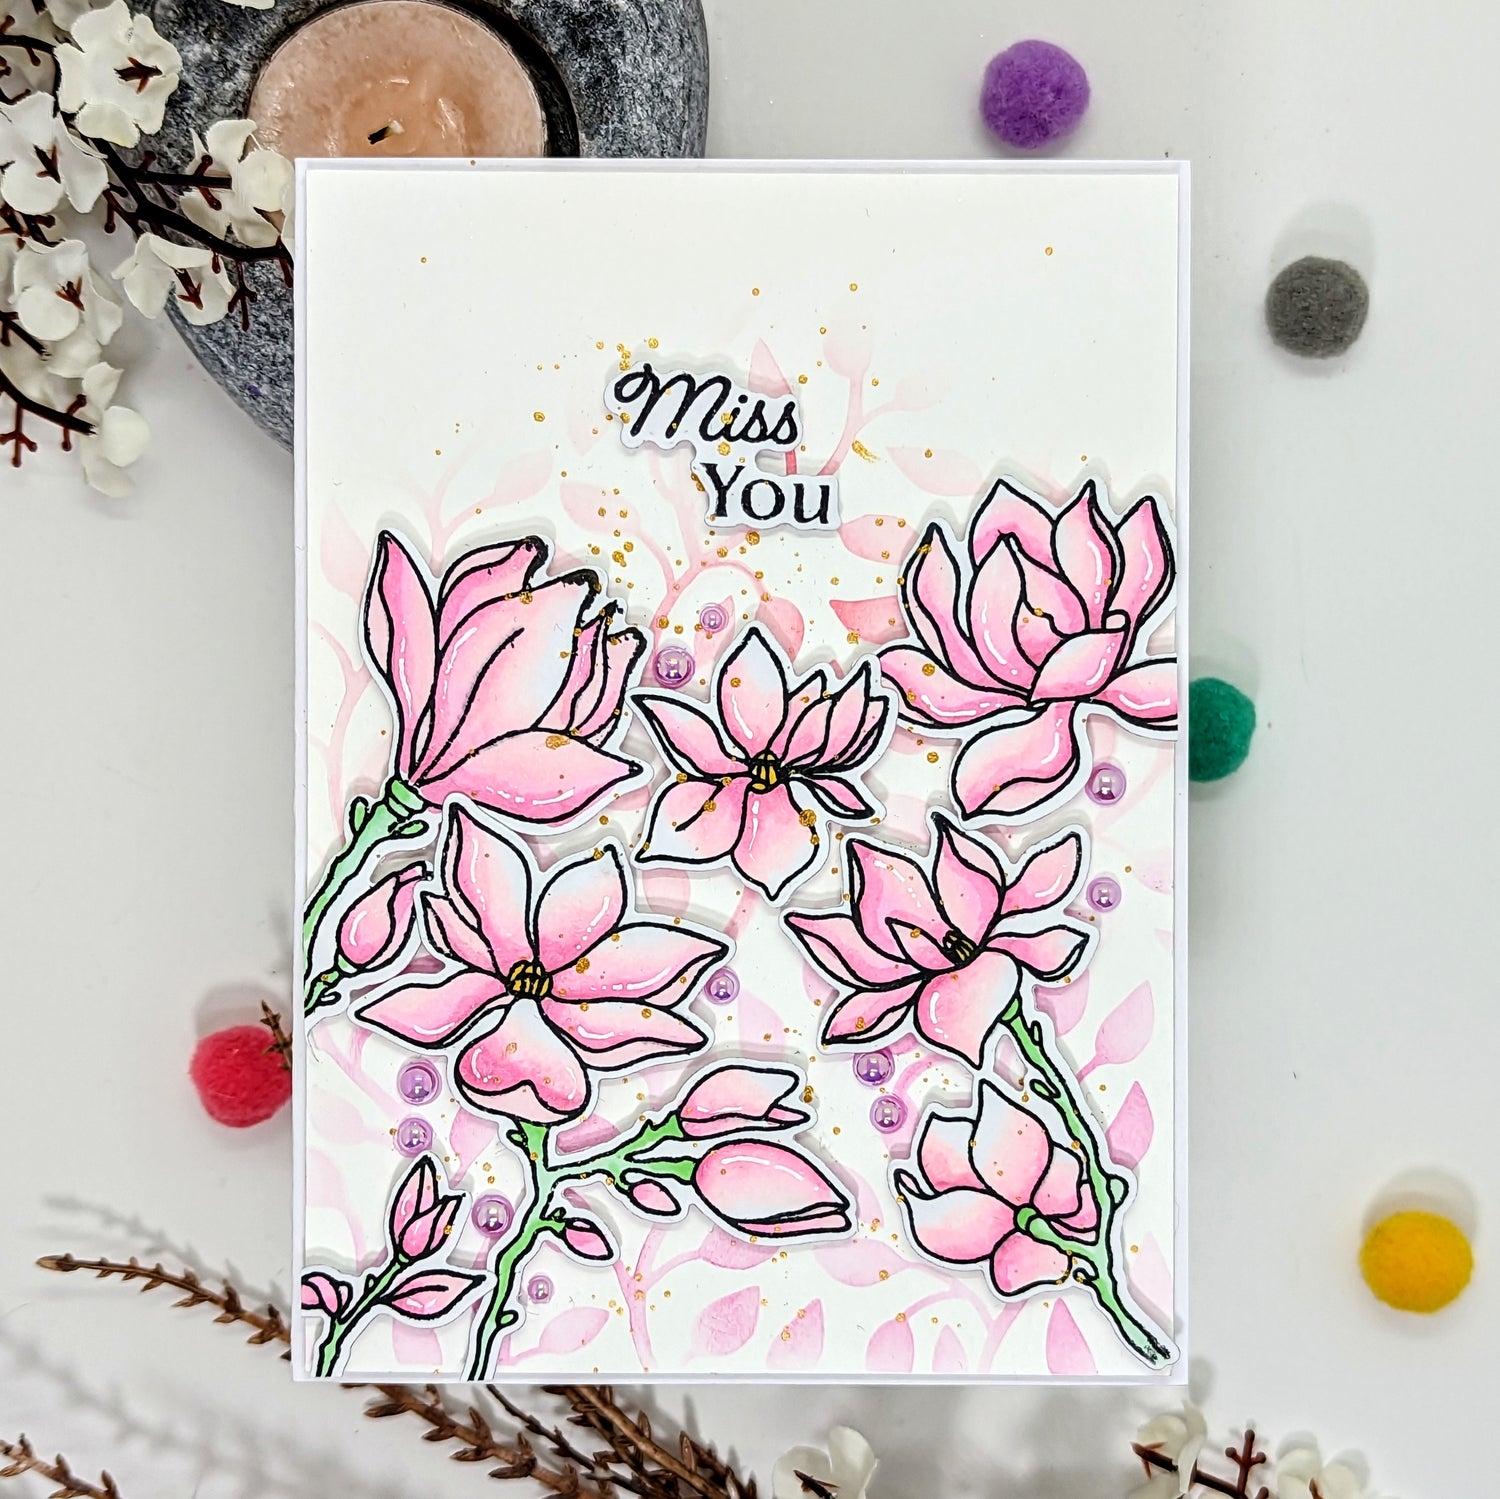 Miss you card by Anna